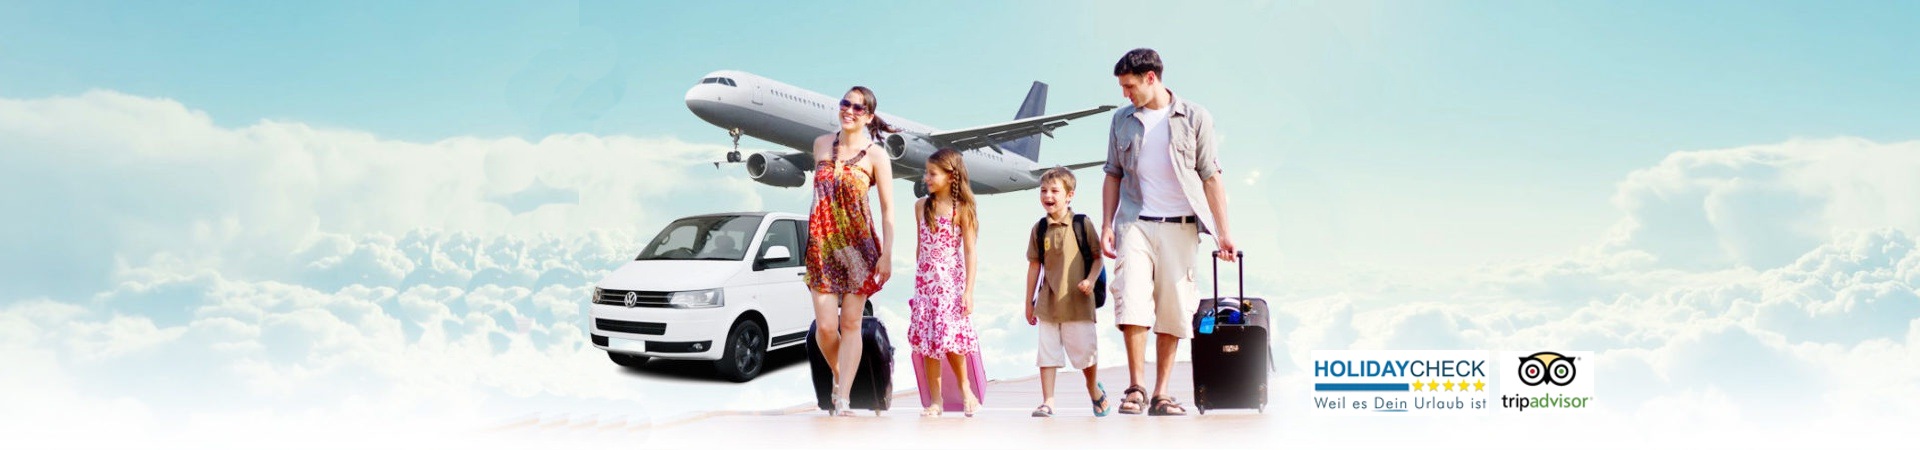 Airport transfer to Hotels